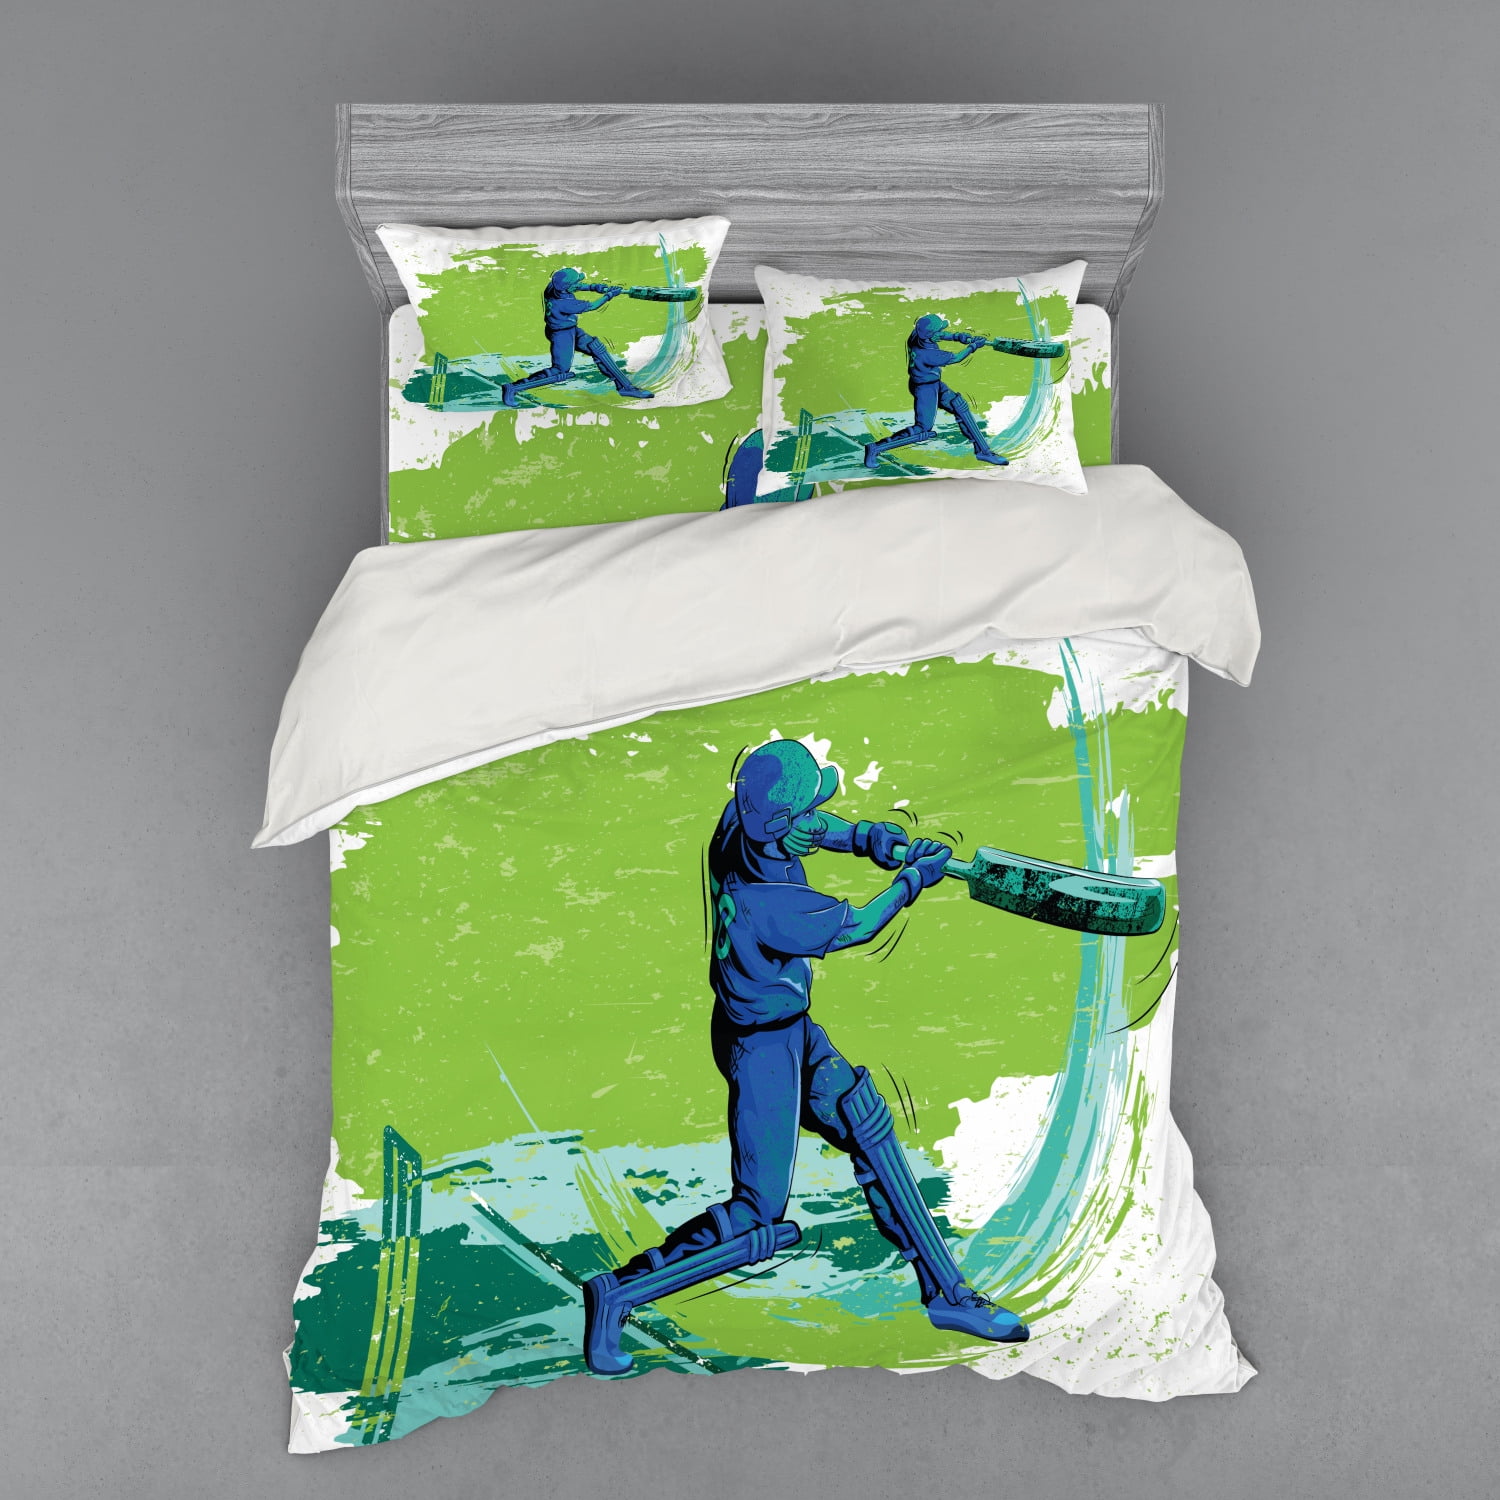 Sports Duvet Cover Set with Pillow Shams Cricket Player Pitching Print 